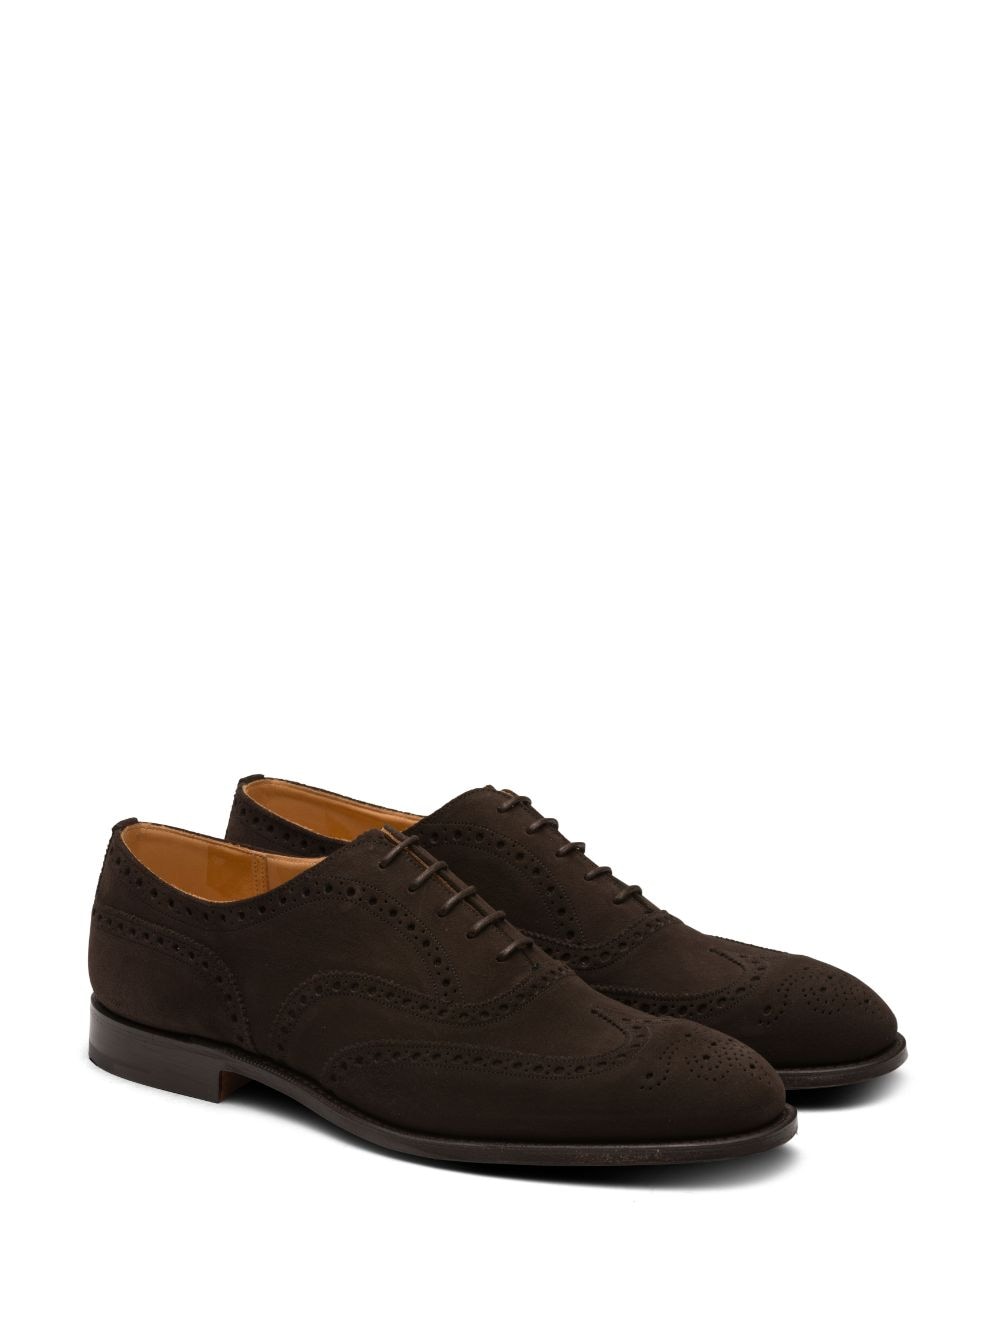 Image 2 of Church's Chetwynd suede oxford brogues